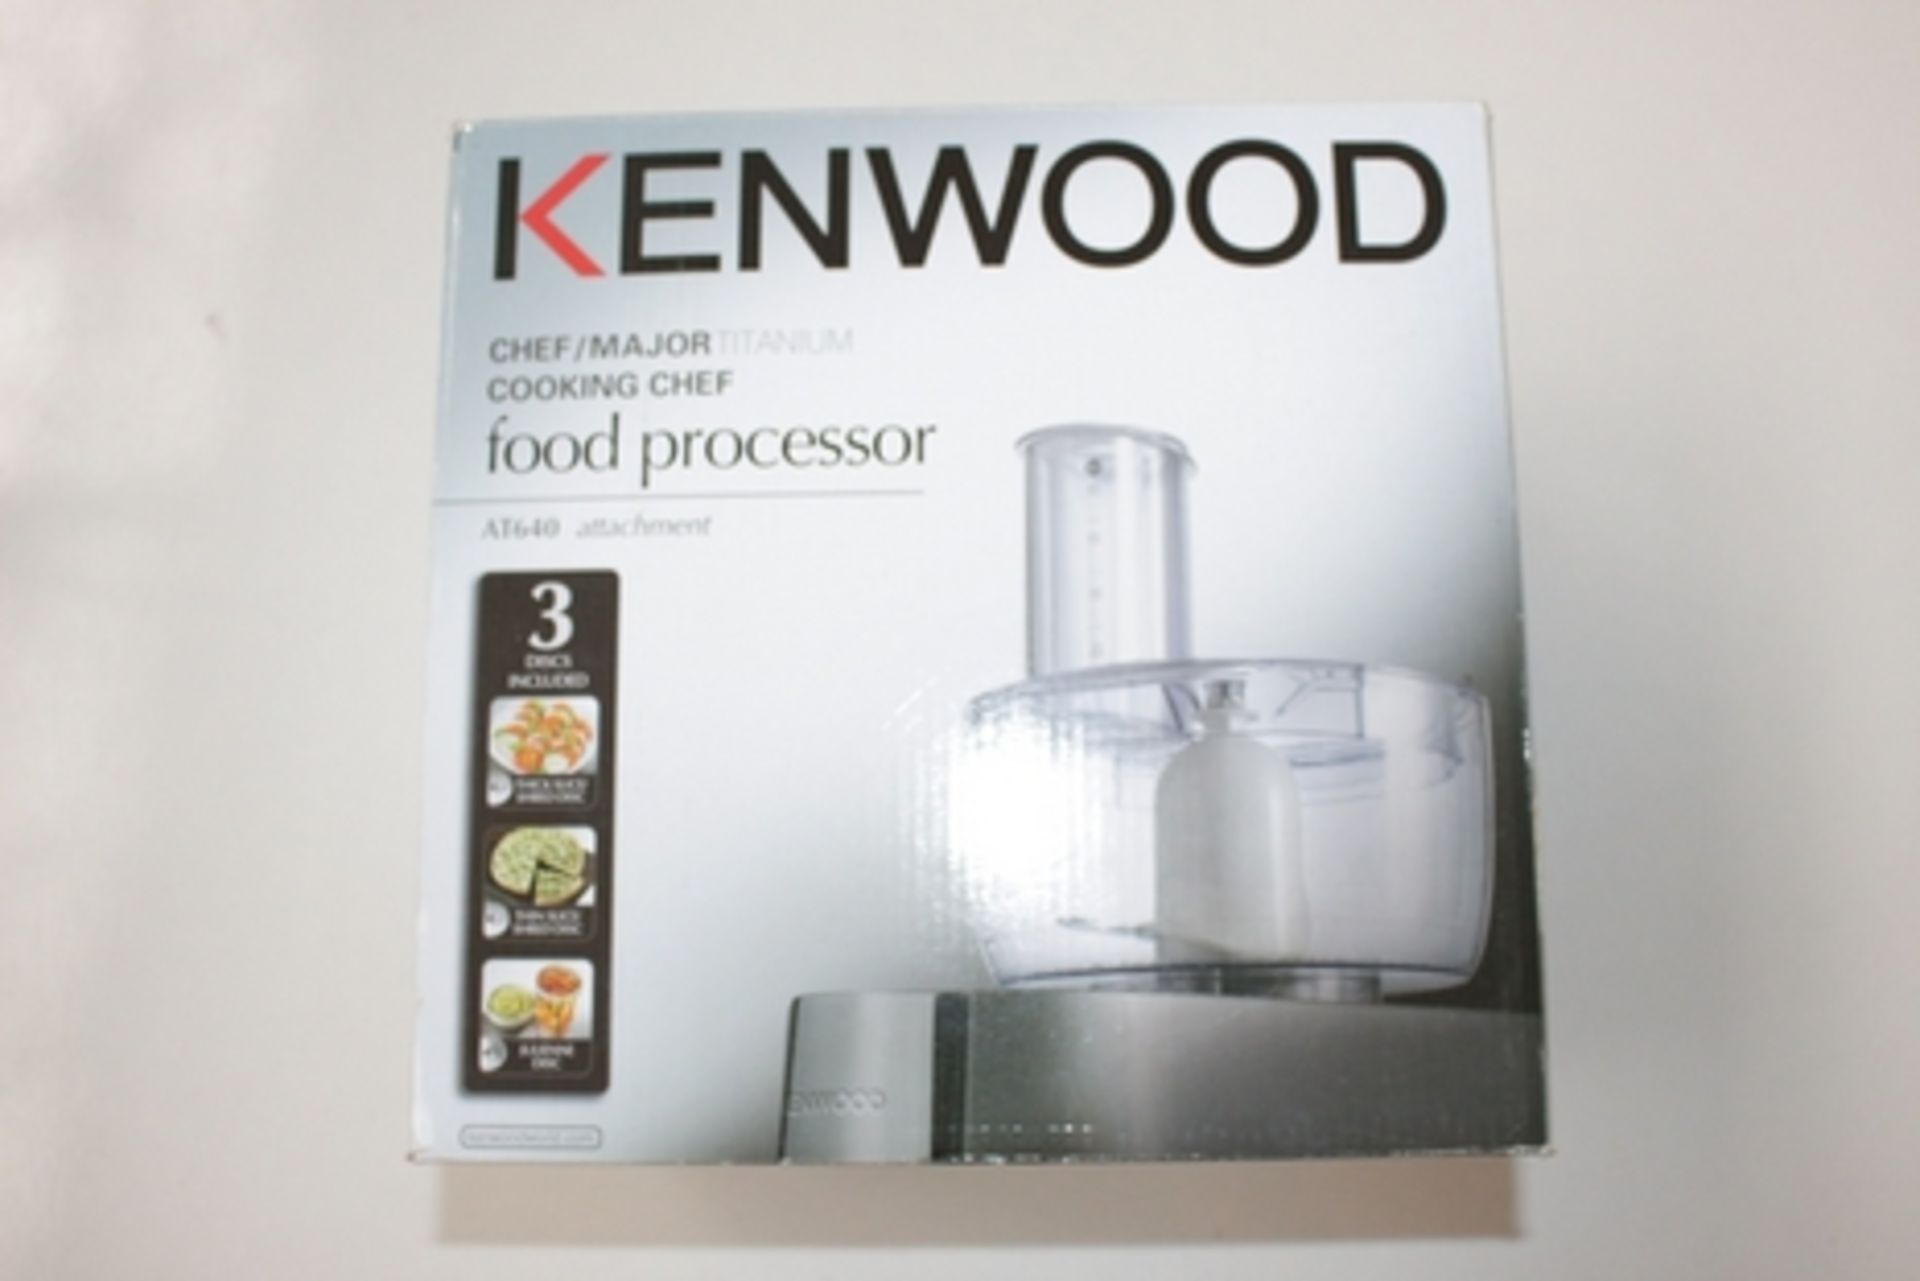 1X BOXED KENWOOD CHEF/MAJOR COOKING CHEF FOOD PROCESSOR ATTACHMENT RRP £40 (DS-TLH-G) (35.004)